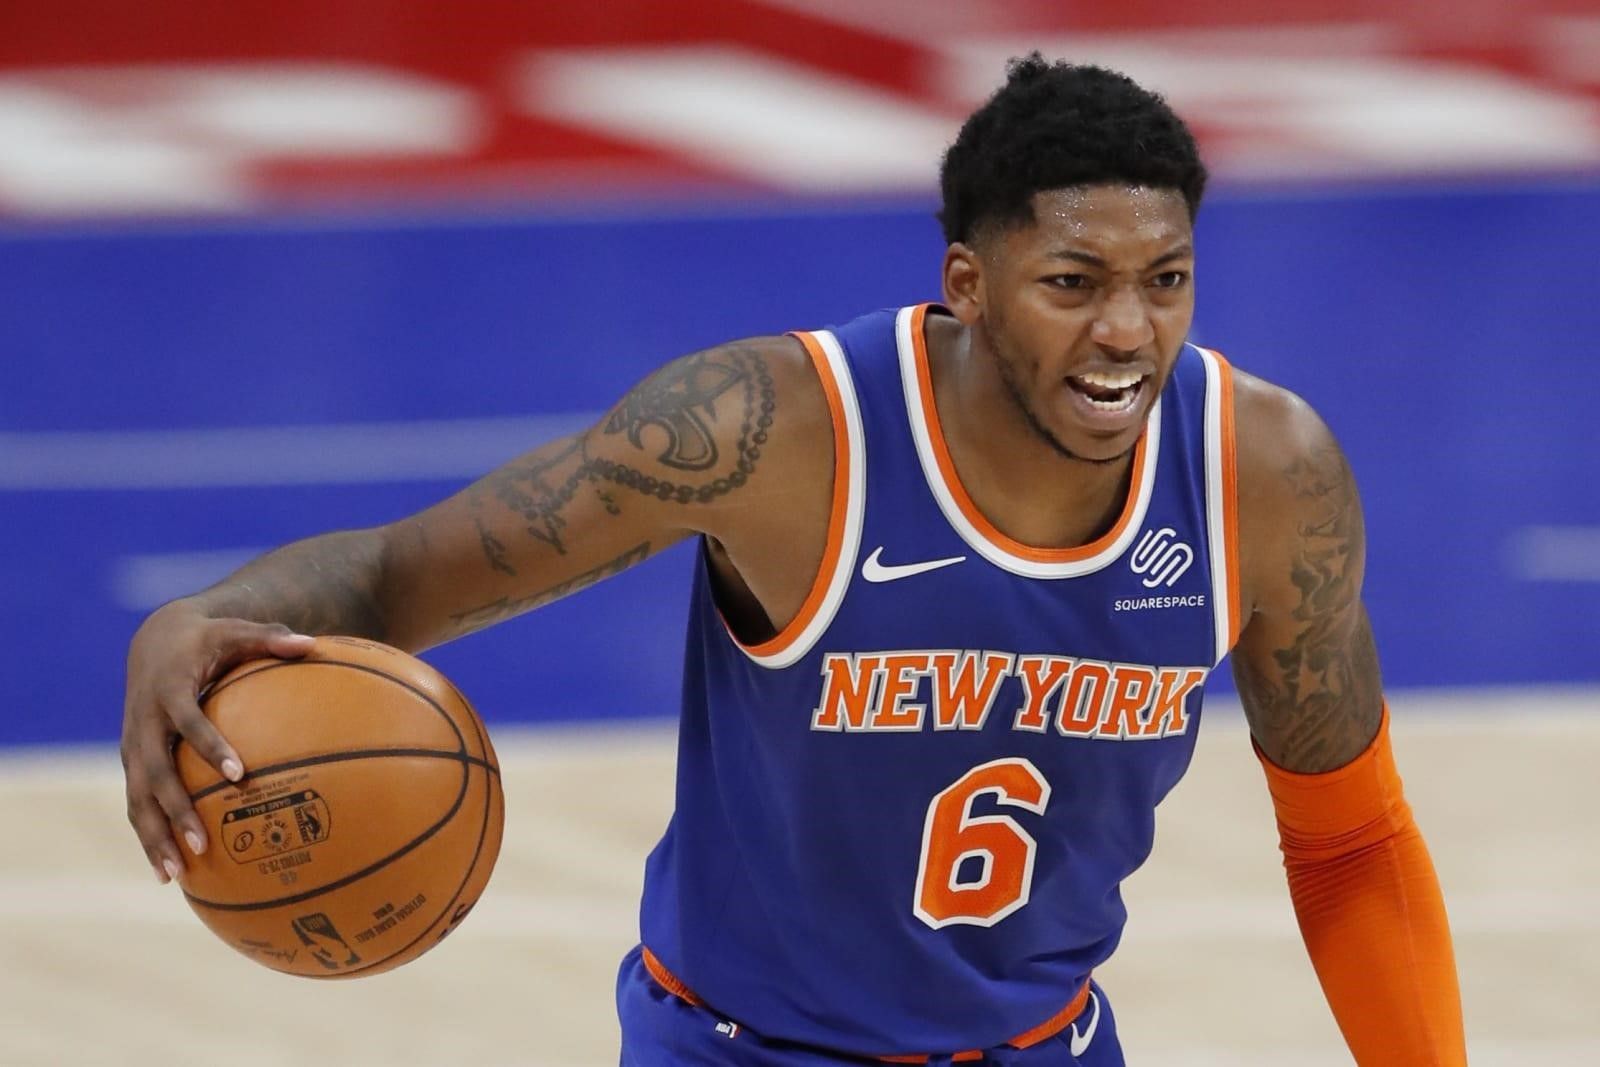 Elfrid Payton to sign with the Phoenix Suns